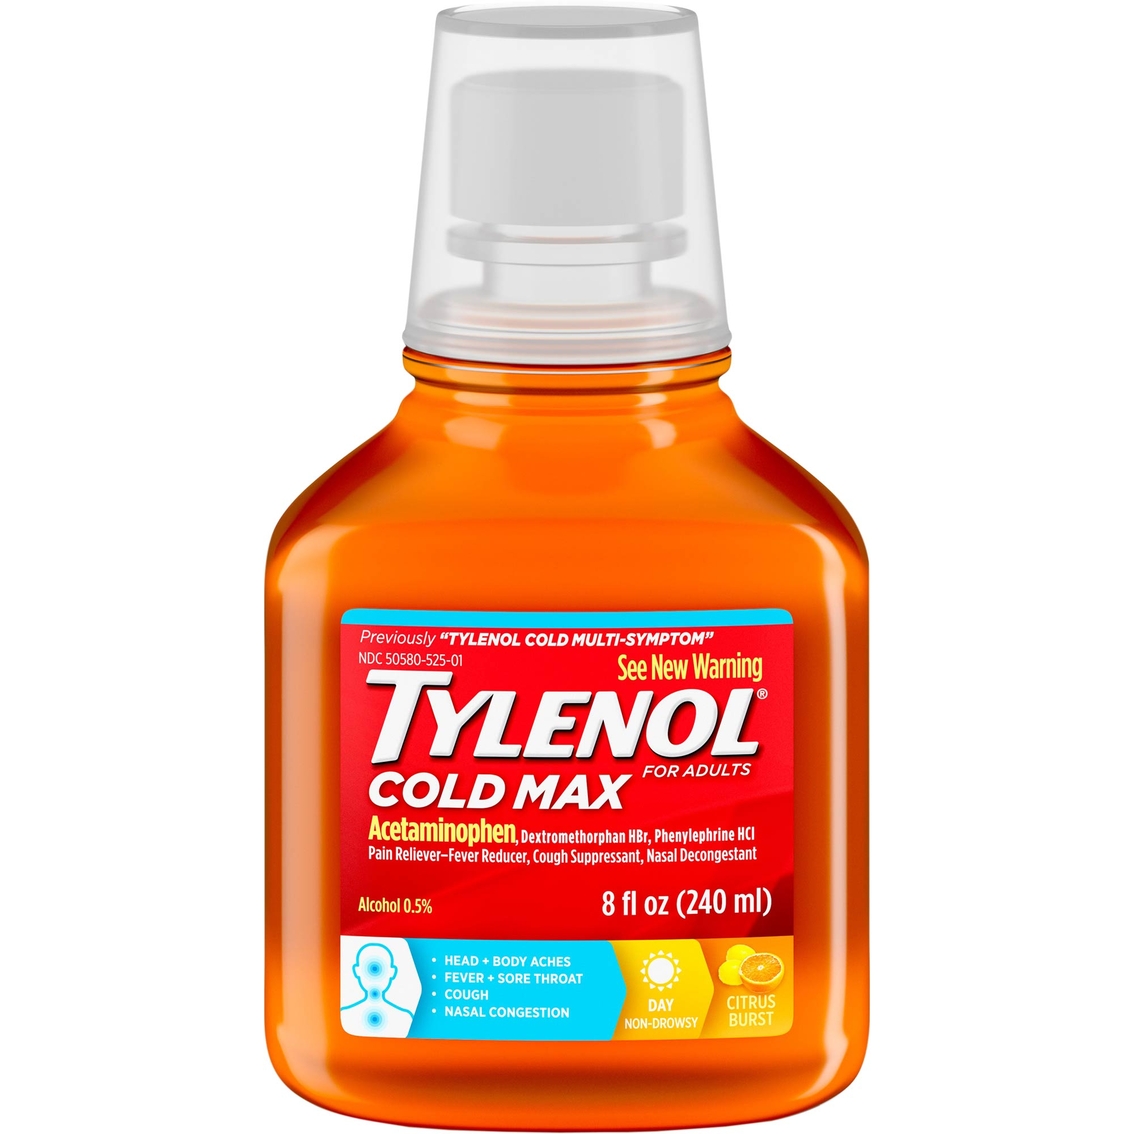 Children S Tylenol Cold Cough And Runny Nose Dosage Chart